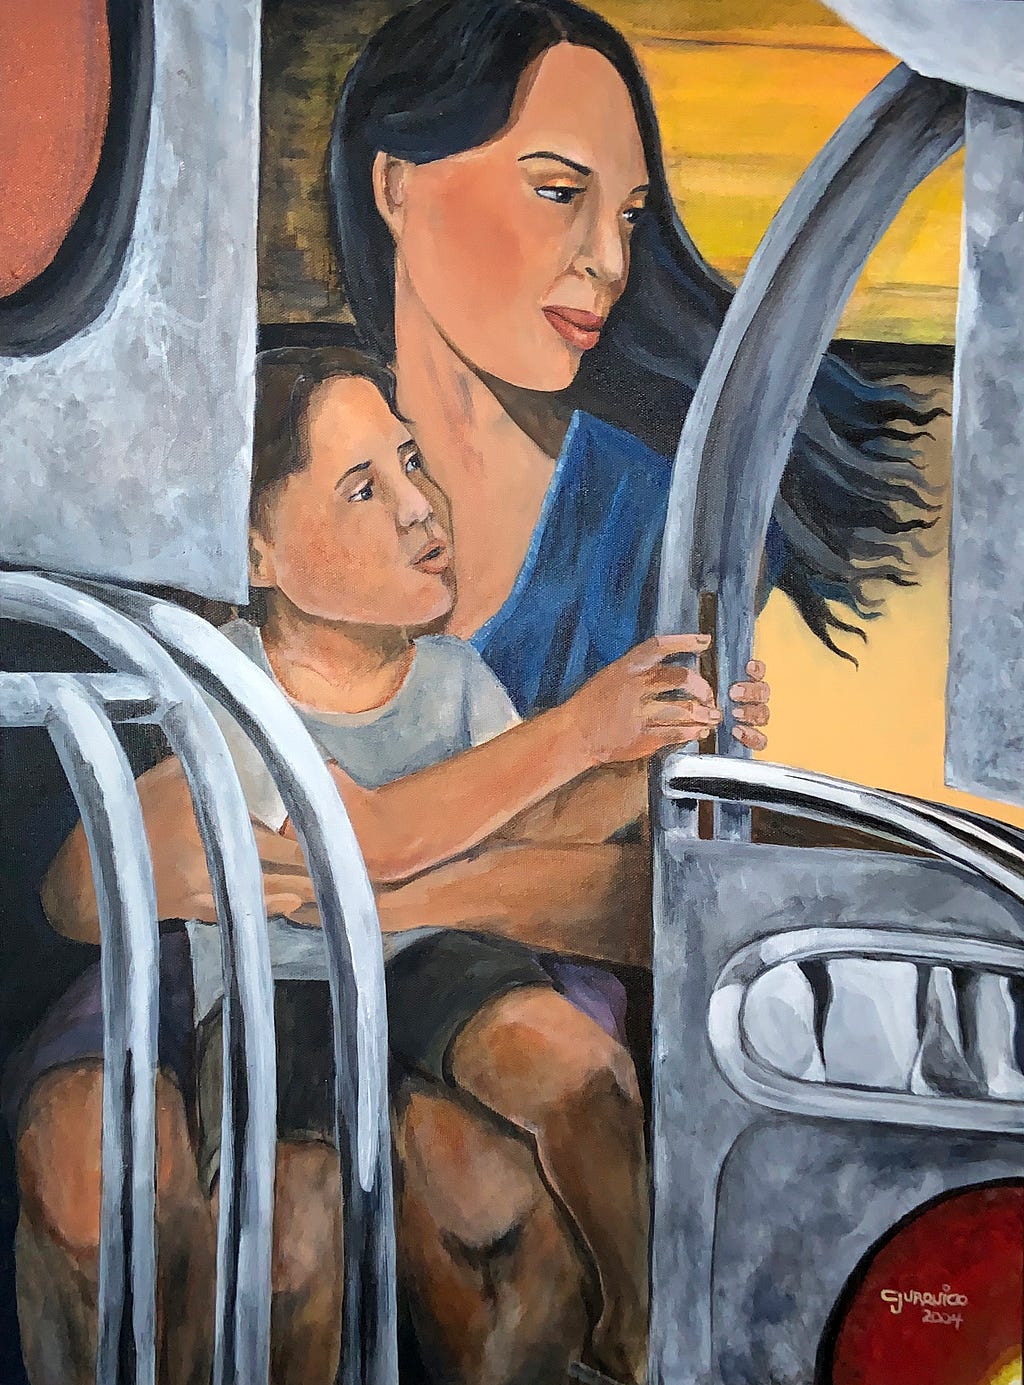 A painting of a child sitting on his mother’s lap clinging to the safety bars of a Jeepney. “Mother and Child’ 2004 — Acrylic on Canvas — CJ Urquico